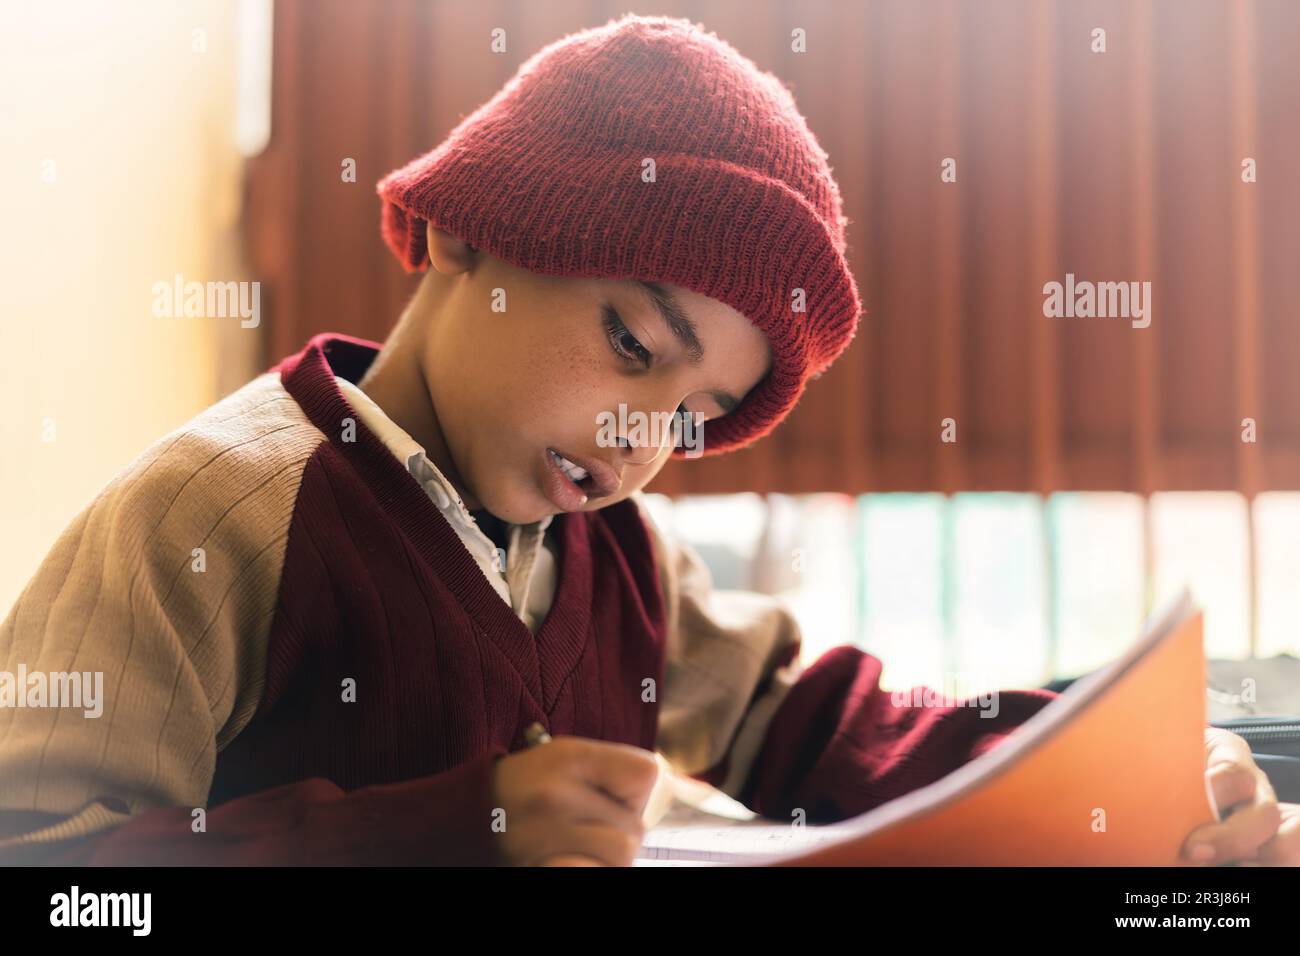 Indian boy studying in the classroom, writing on a notepad and wearing his school uniform, education and back to school concept. Stock Photo